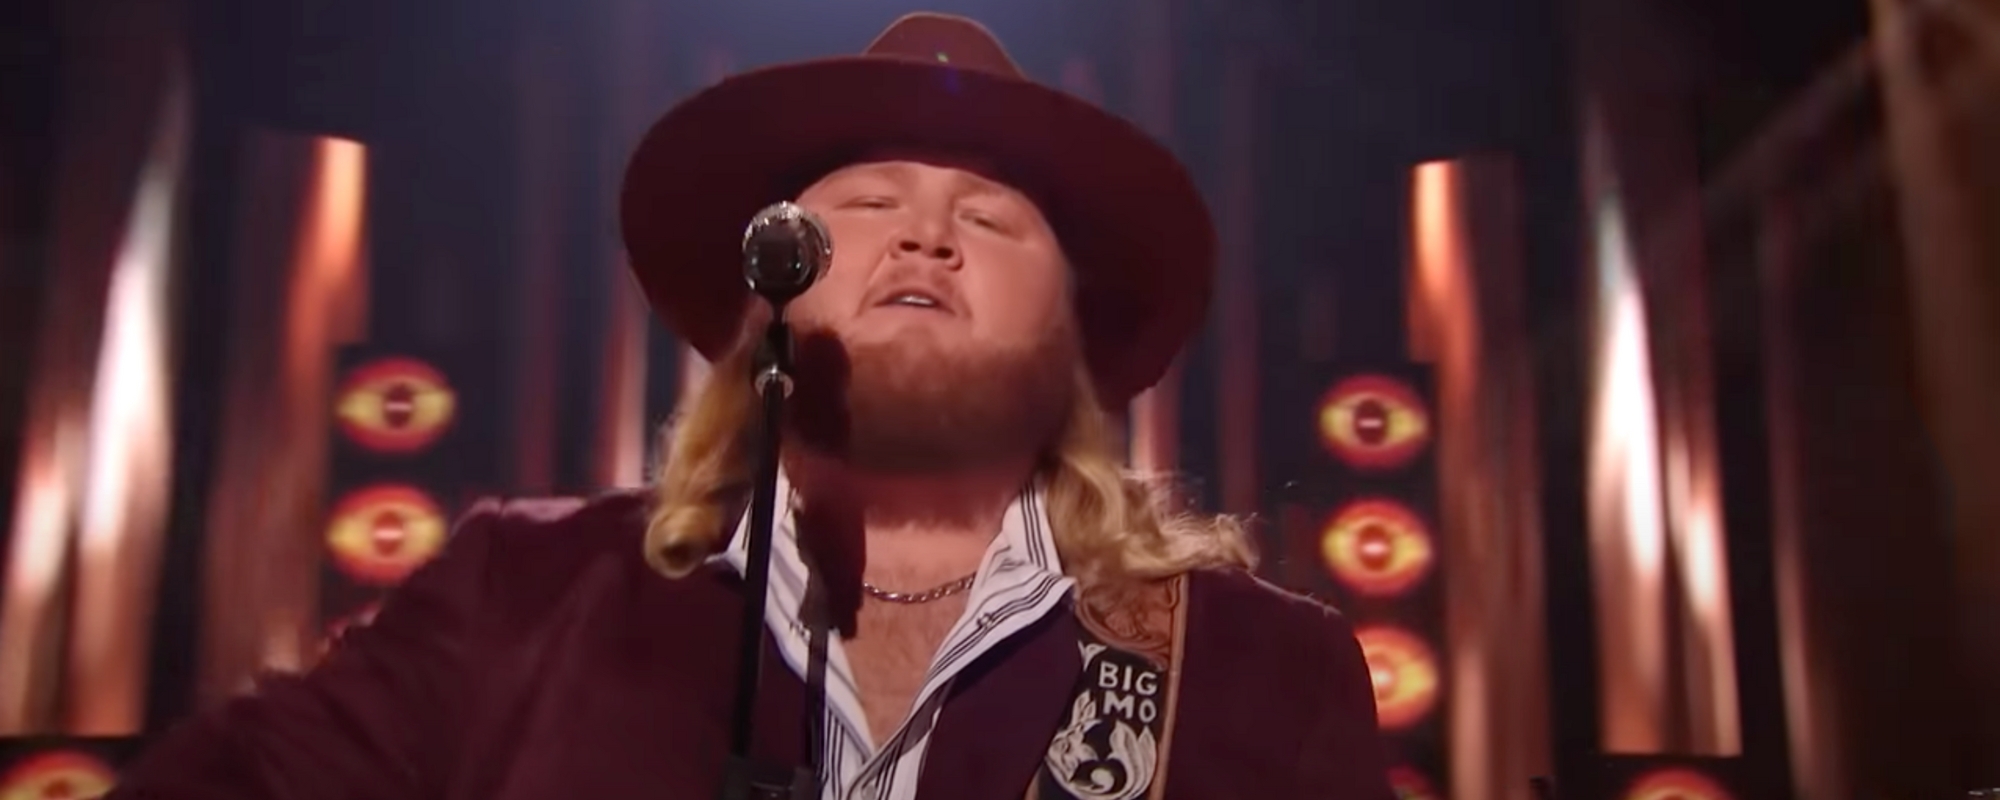 Will Moseley Delivers Breathtaking Of Chris Stapleton's "Ballad of Lonesome Cowboy" on 'American Idol'